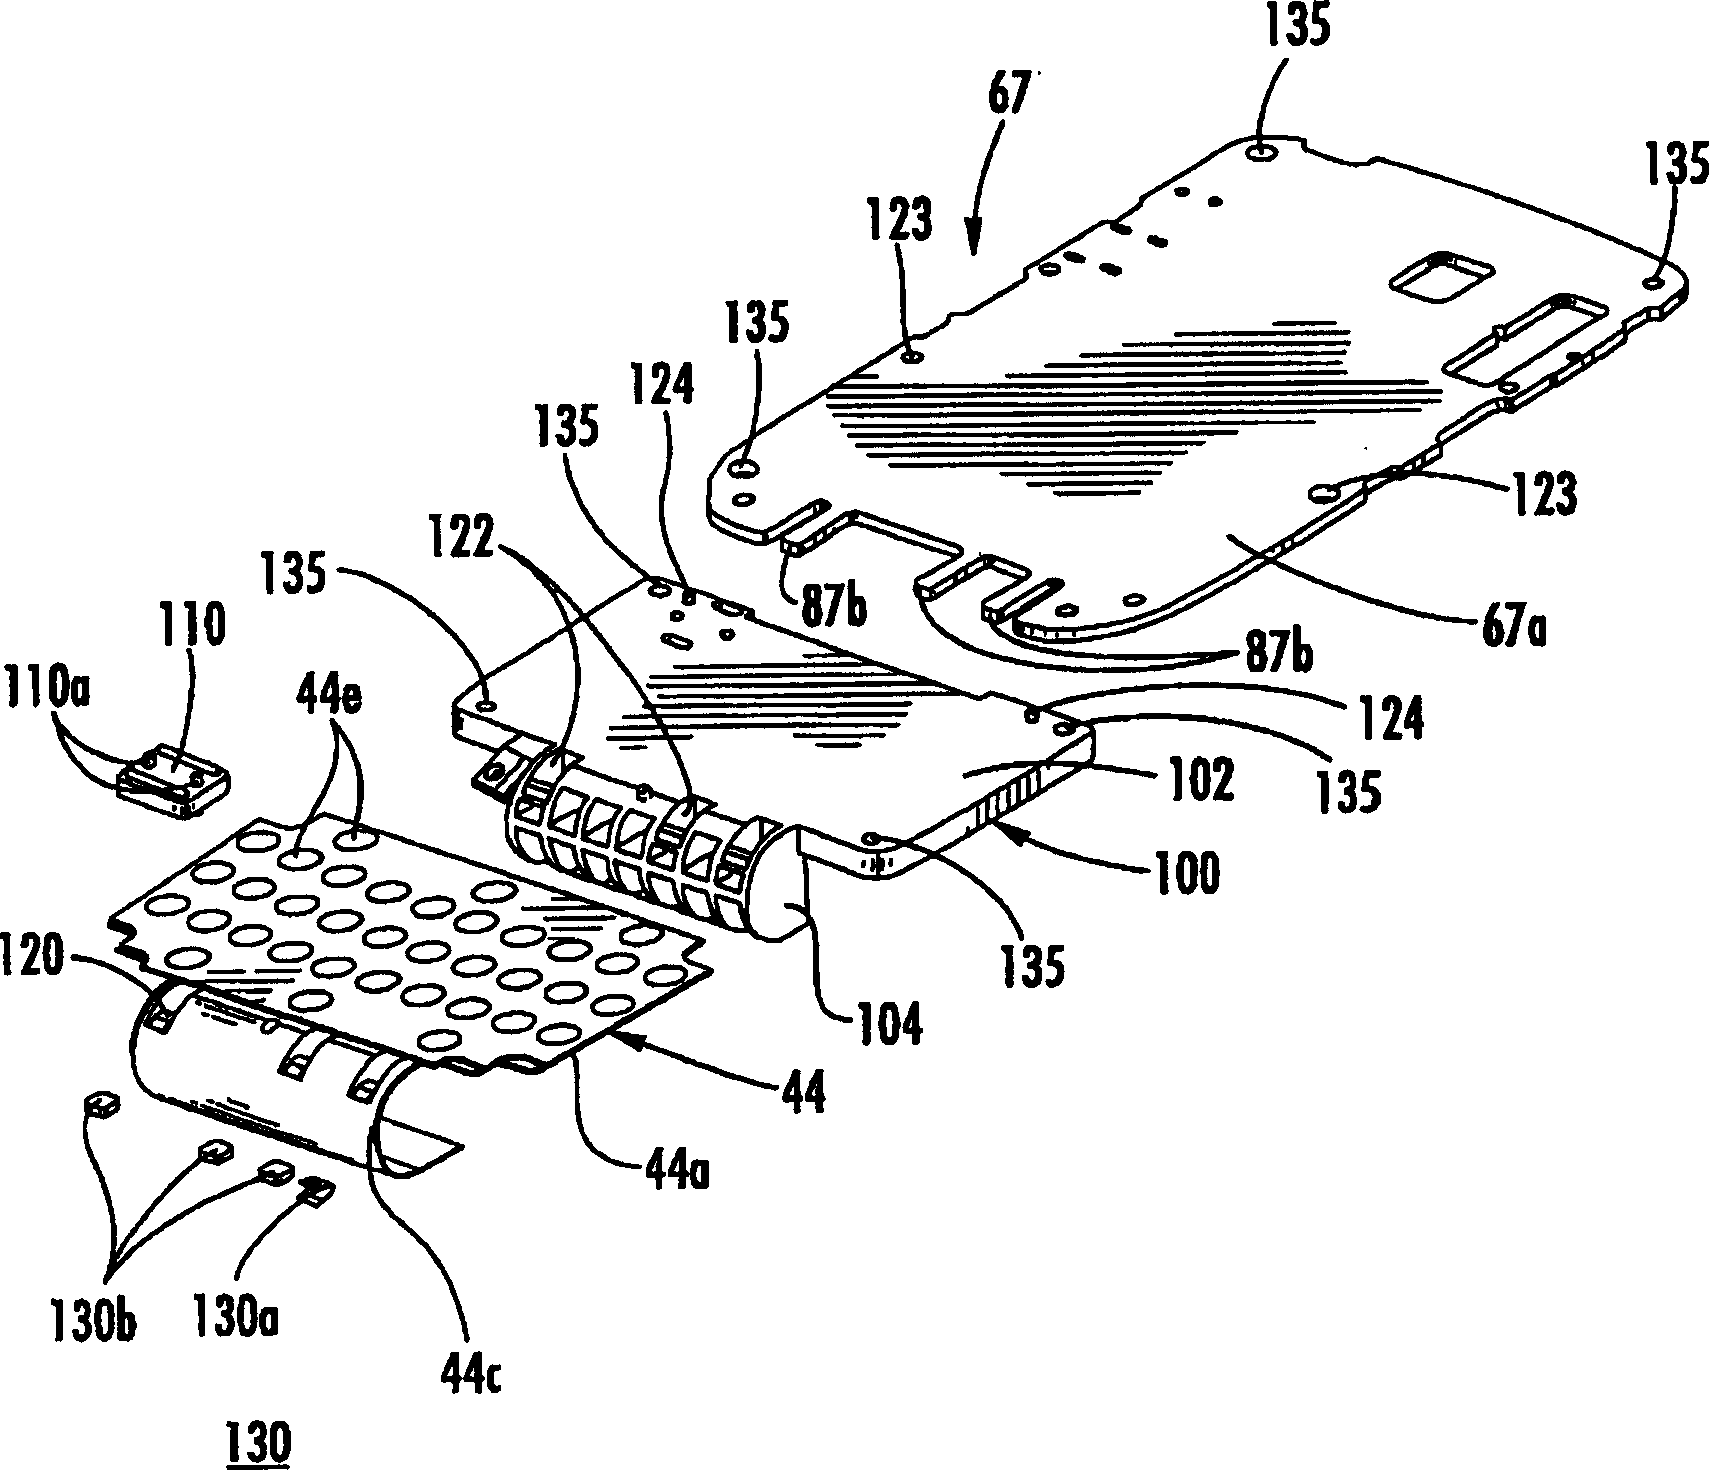 Mobile wireless communications device comprising integrated antenna and keyboard and related methods